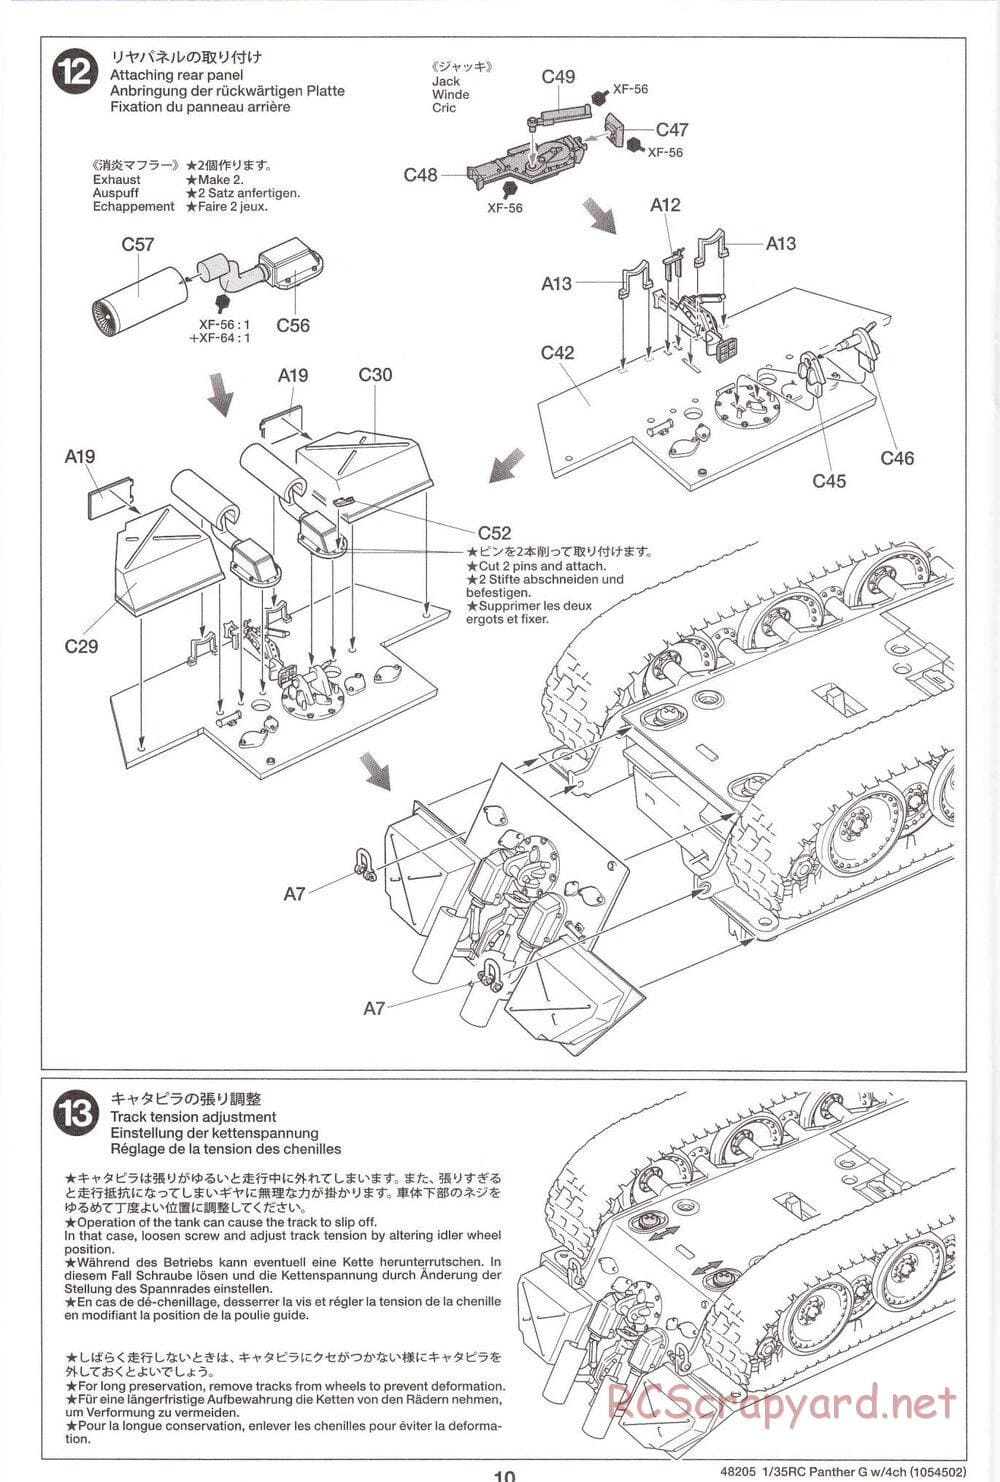 Tamiya - German Panther Type G - 1/35 Scale Chassis - Manual - Page 10